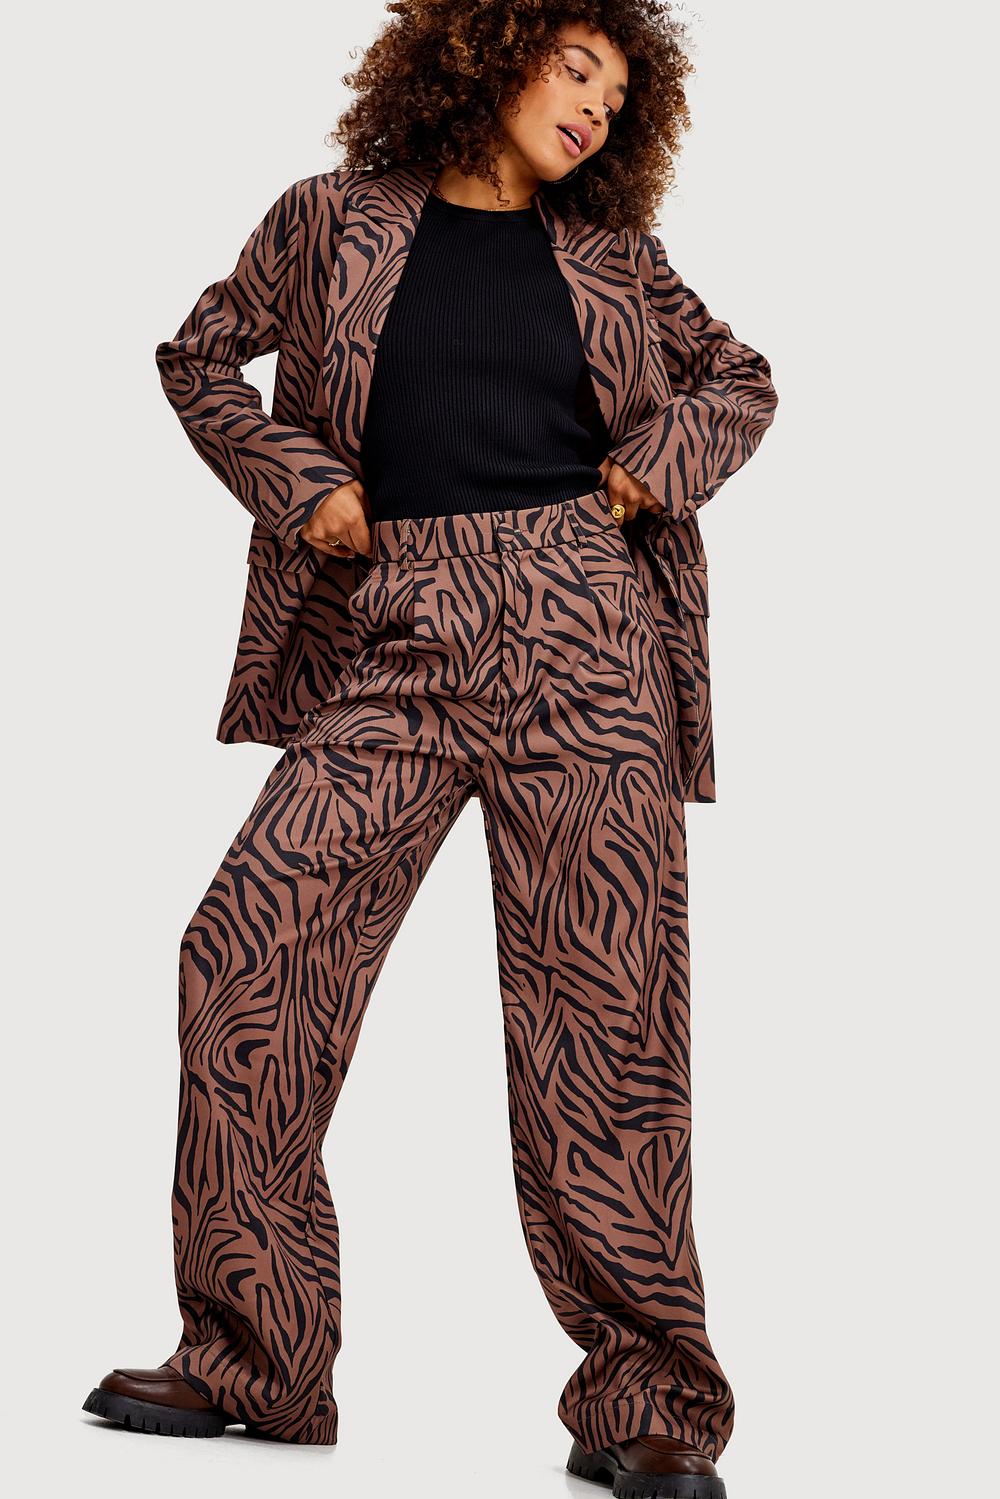 Brown trousers with zebra print